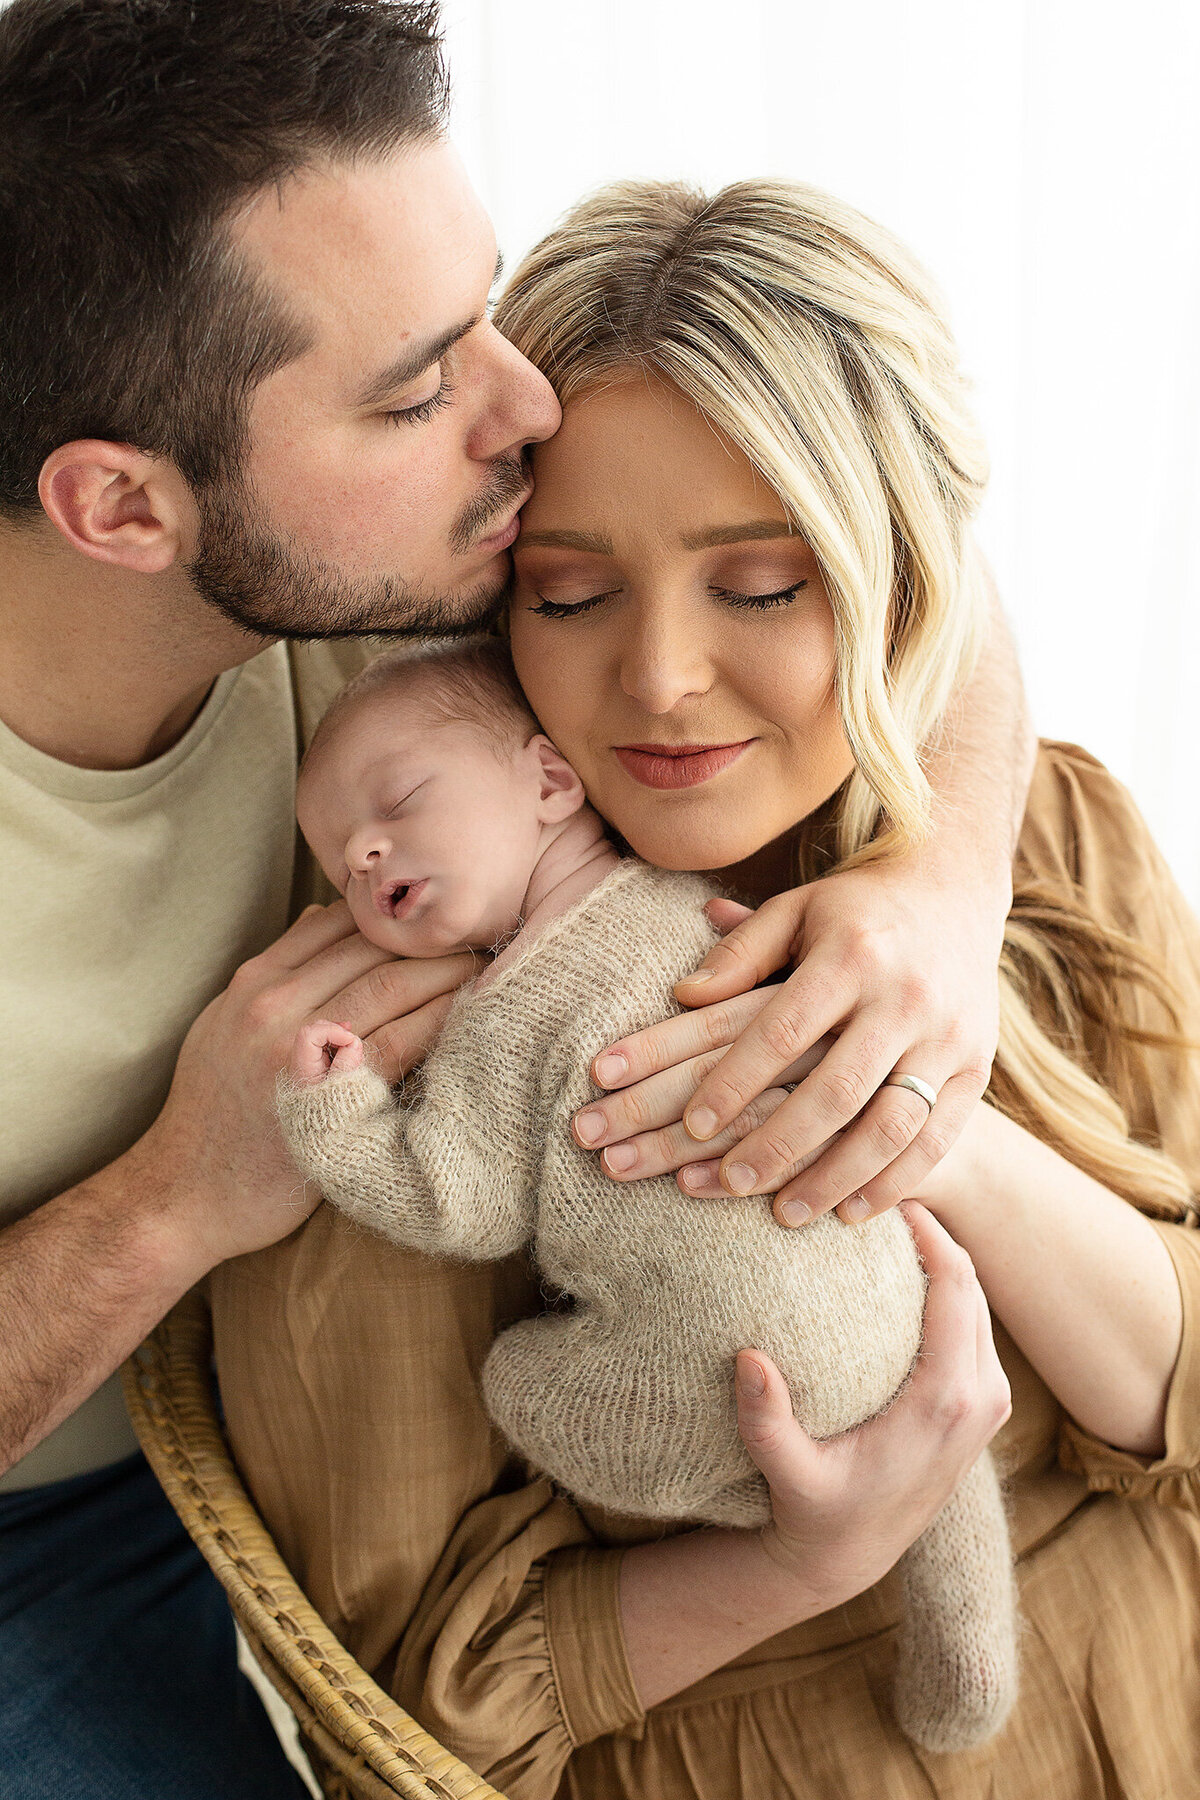 dayton-ohio-newborn-photographer-mom-sitting-in-chair-holding-baby-boy-on-shoulder-while-dad-kisses-her-on-forehead